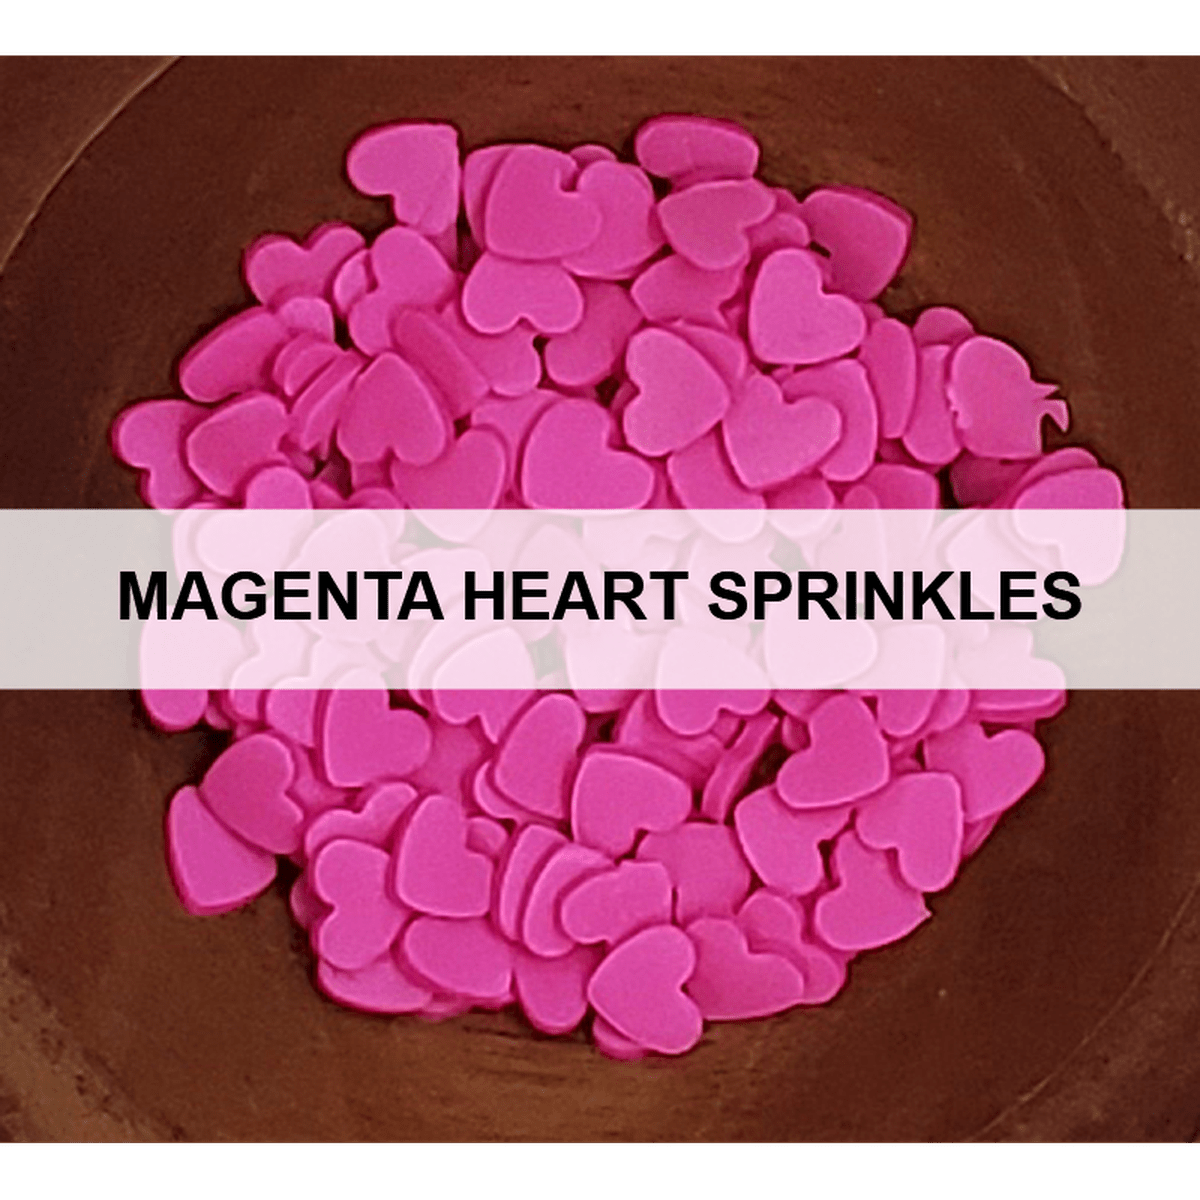 Magenta Heart Sprinkles by Kat Scrappiness - Kat Scrappiness